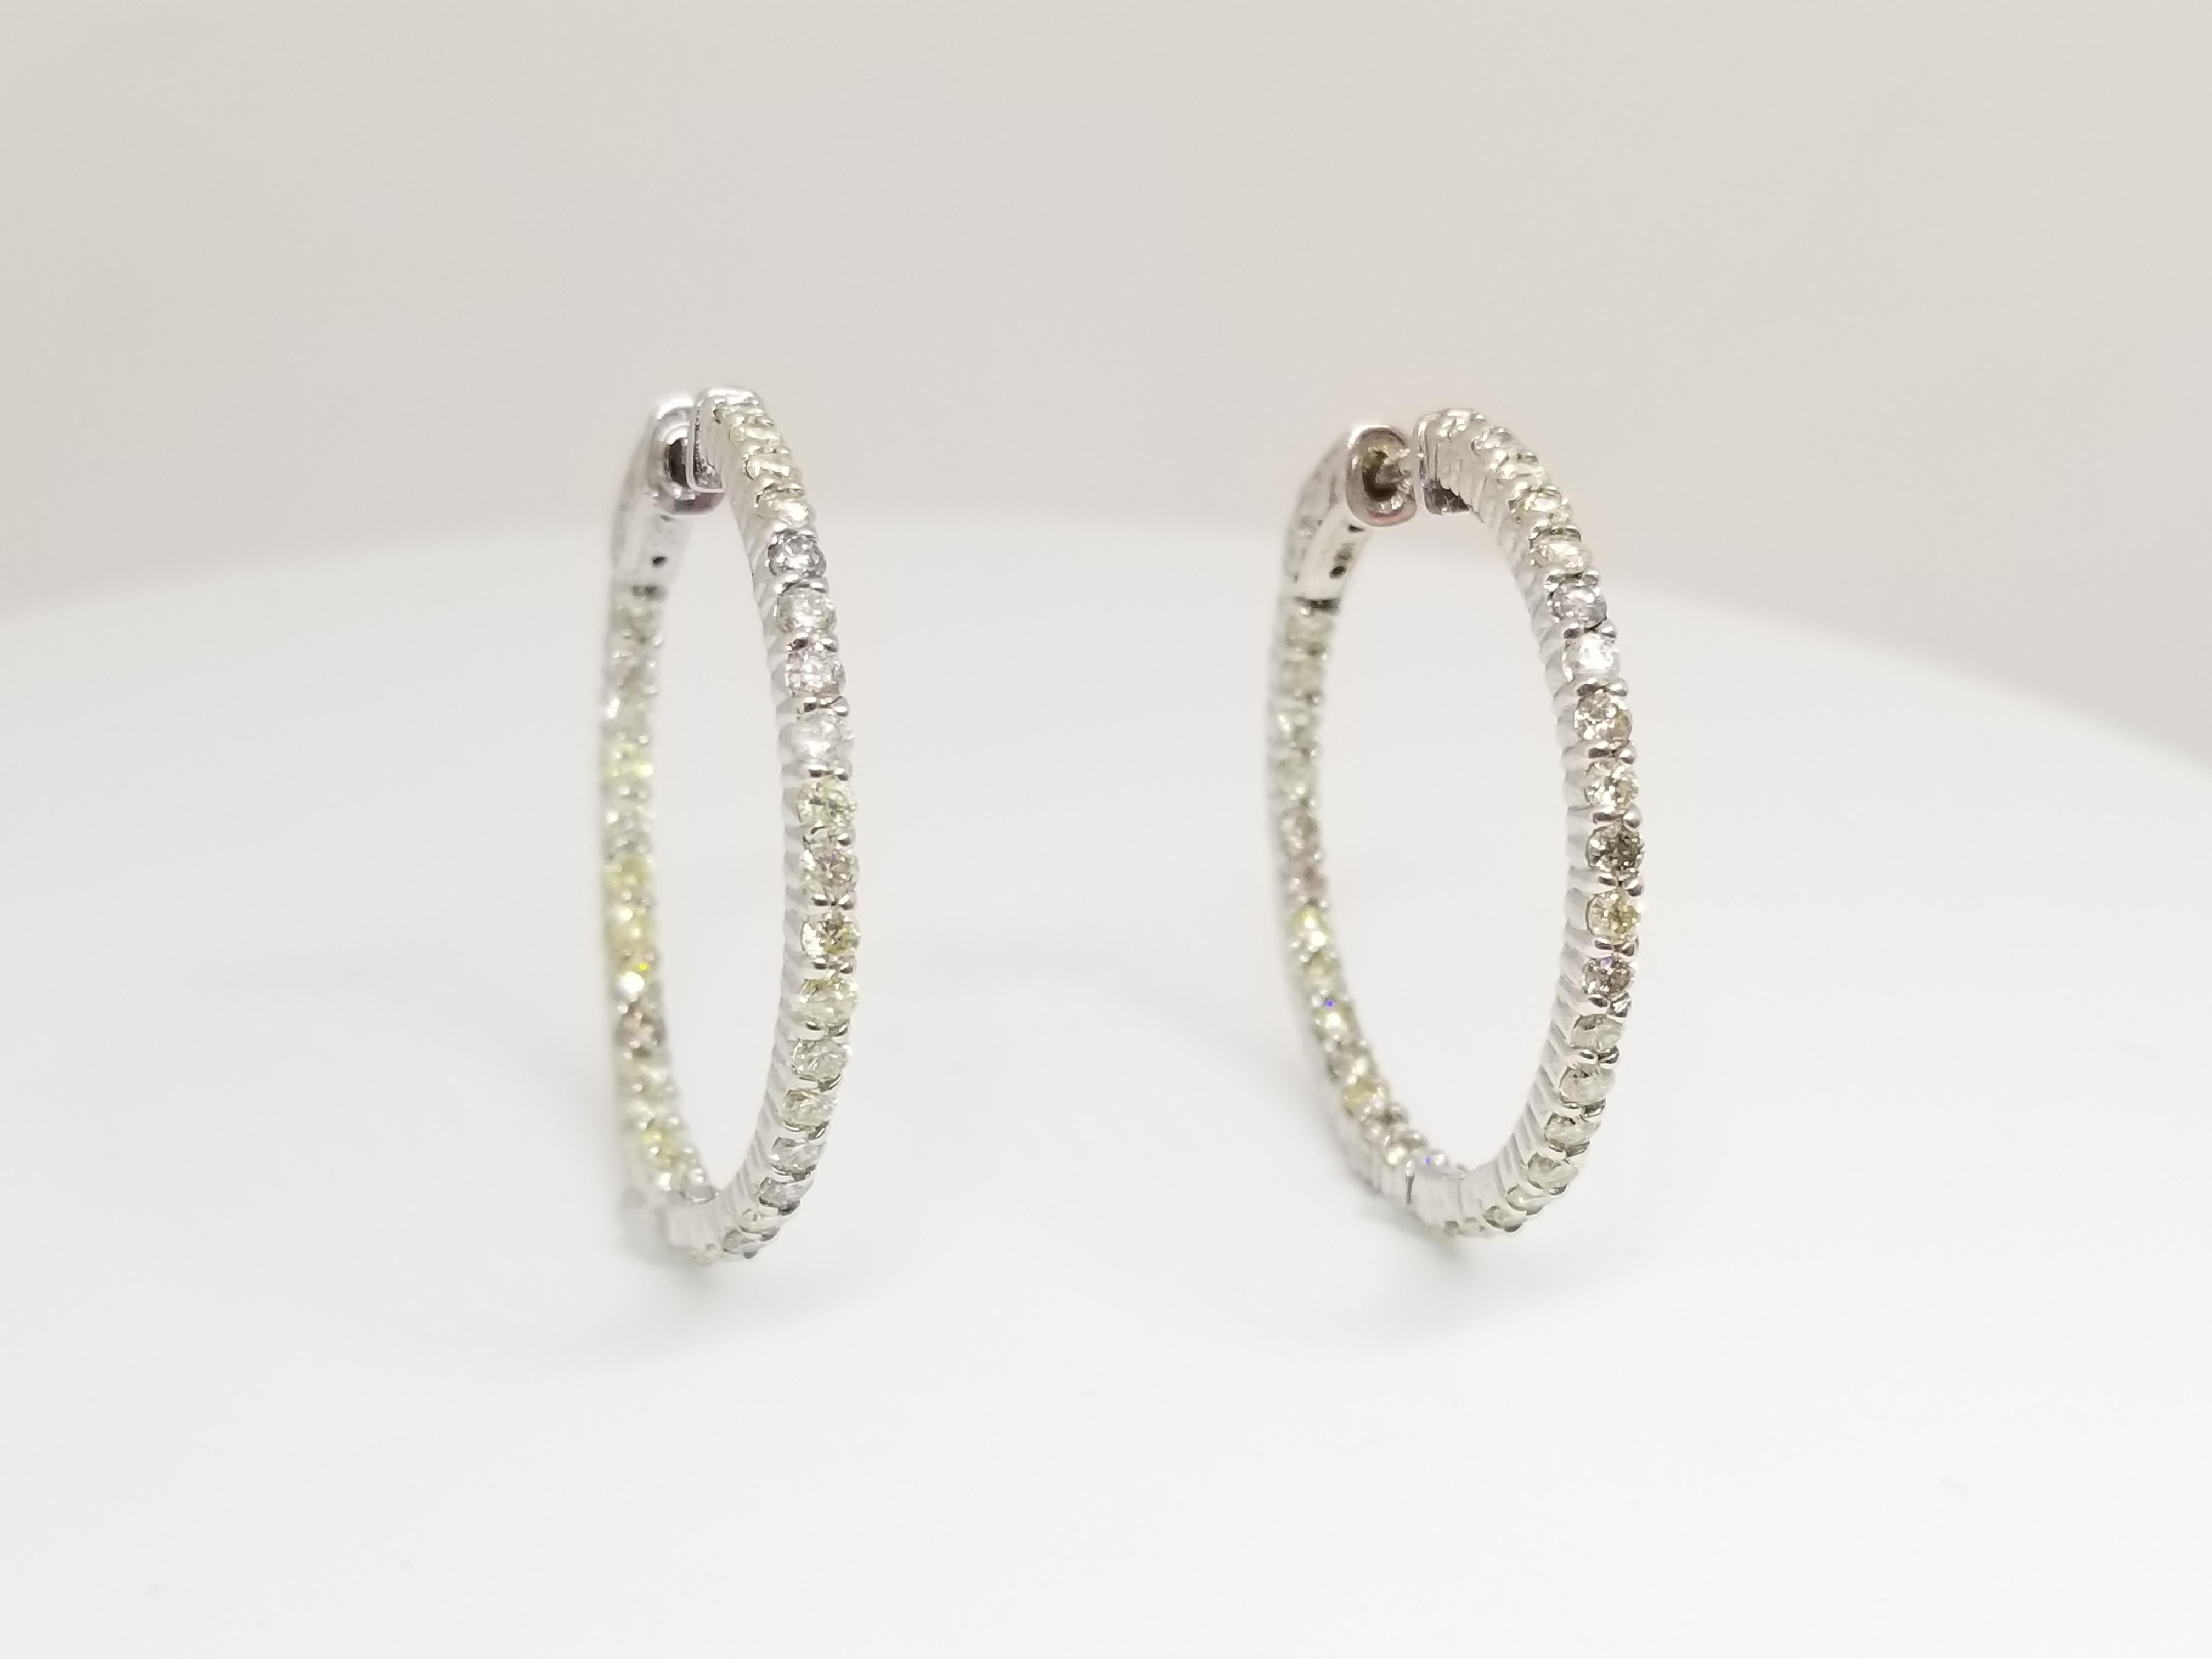 Beautiful pair of huggie diamond inside out hoop earrings available in 14k white gold. Secures with snap closure for wear.  Measures 1 inch in diameter. Beautiful for the holiday!